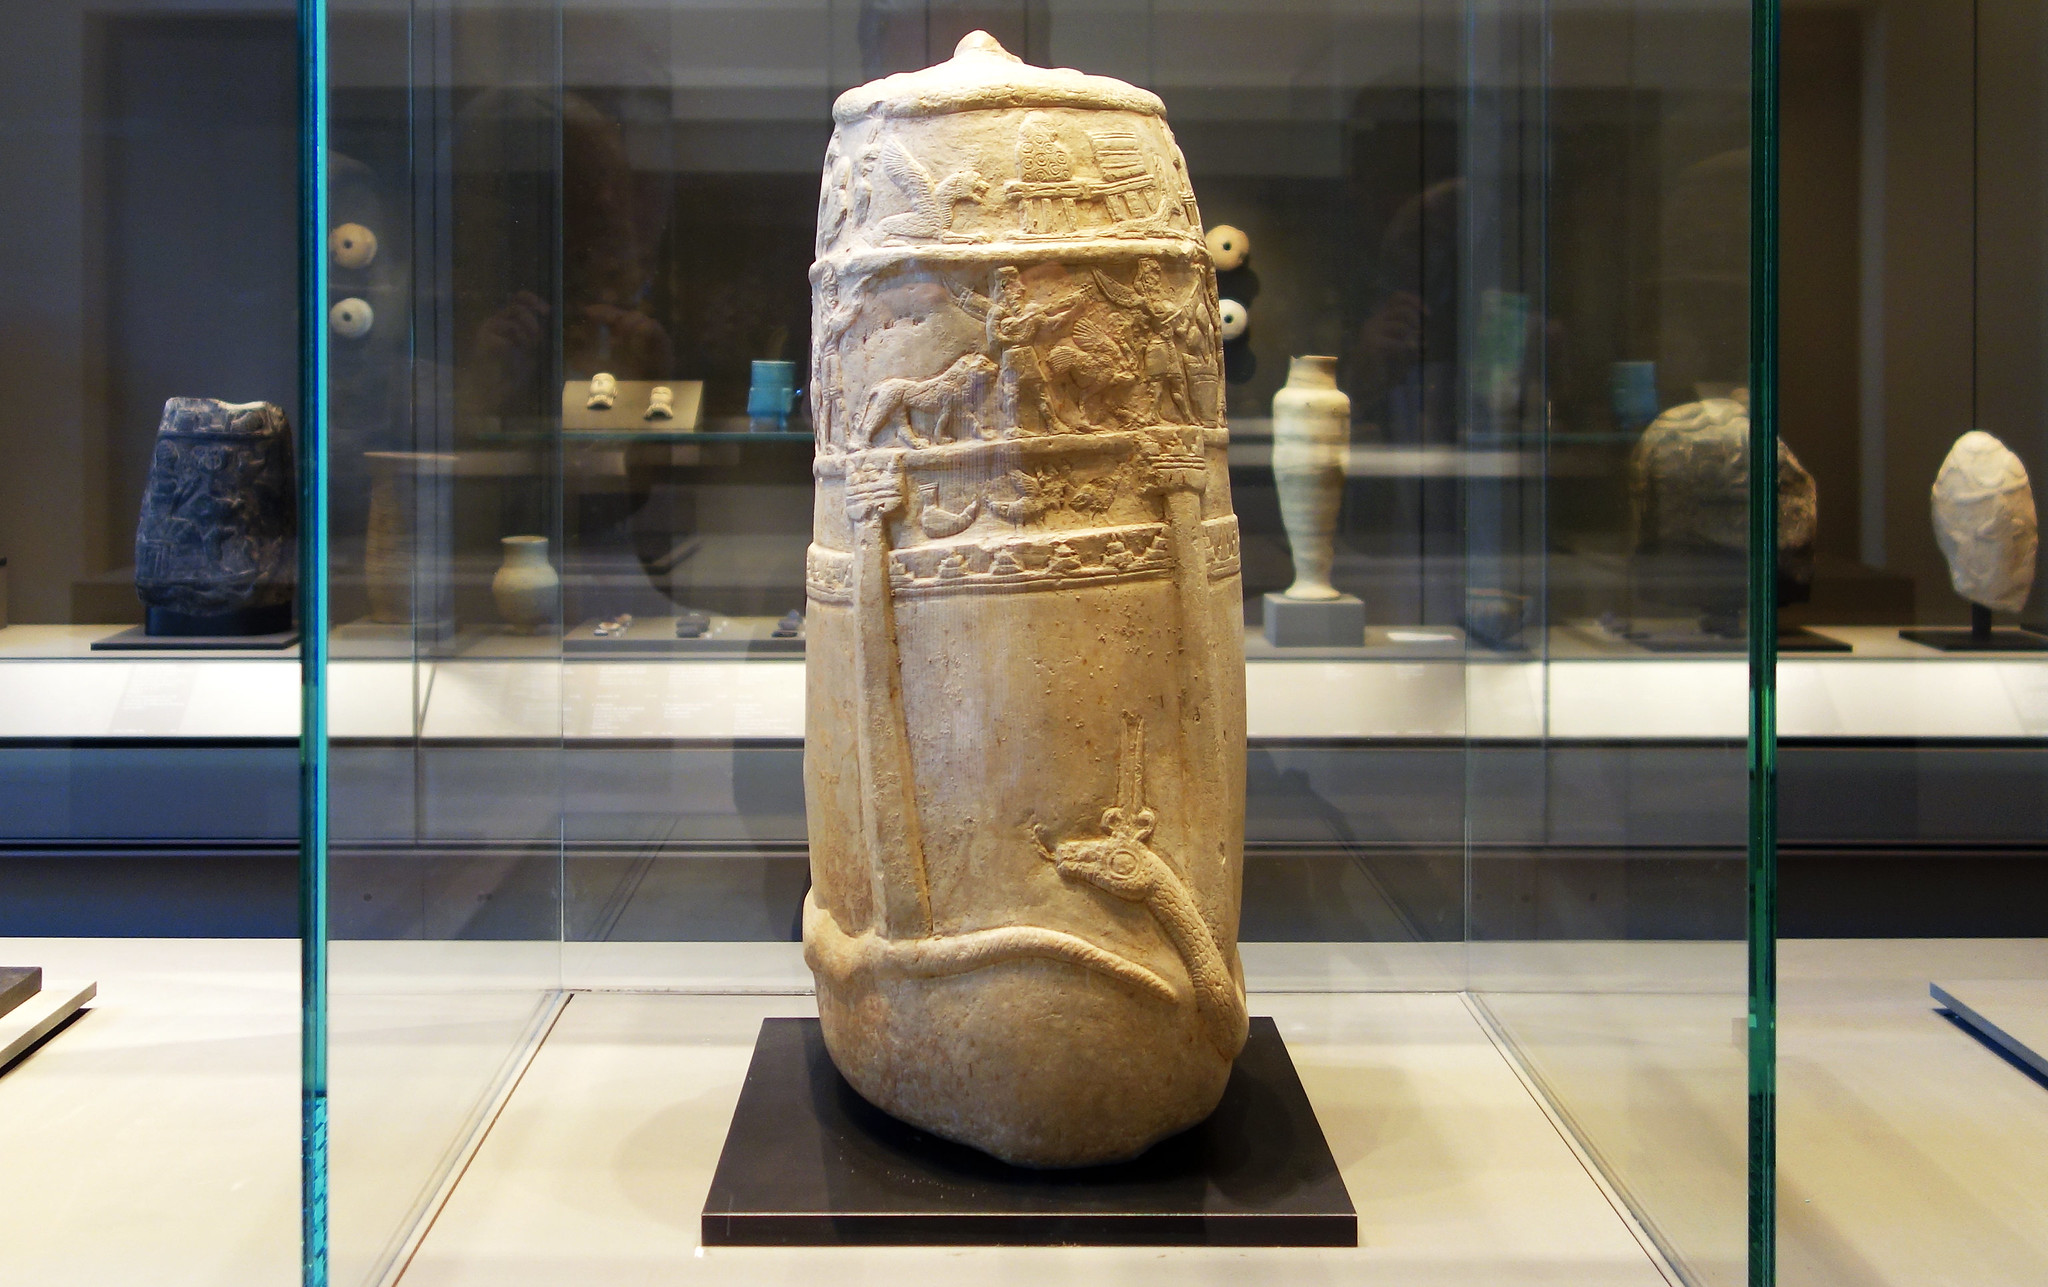 "Unfinished" Kudurru, Kassite period, attributed to the reign of Melishipak, 1186–1172 B.C.E., found in Susa, where it had been taken as war booty in the 12th century B.C.E. (Louvre, Paris; photo: Steven Zucker, CC BY-NC-SA 2.0)